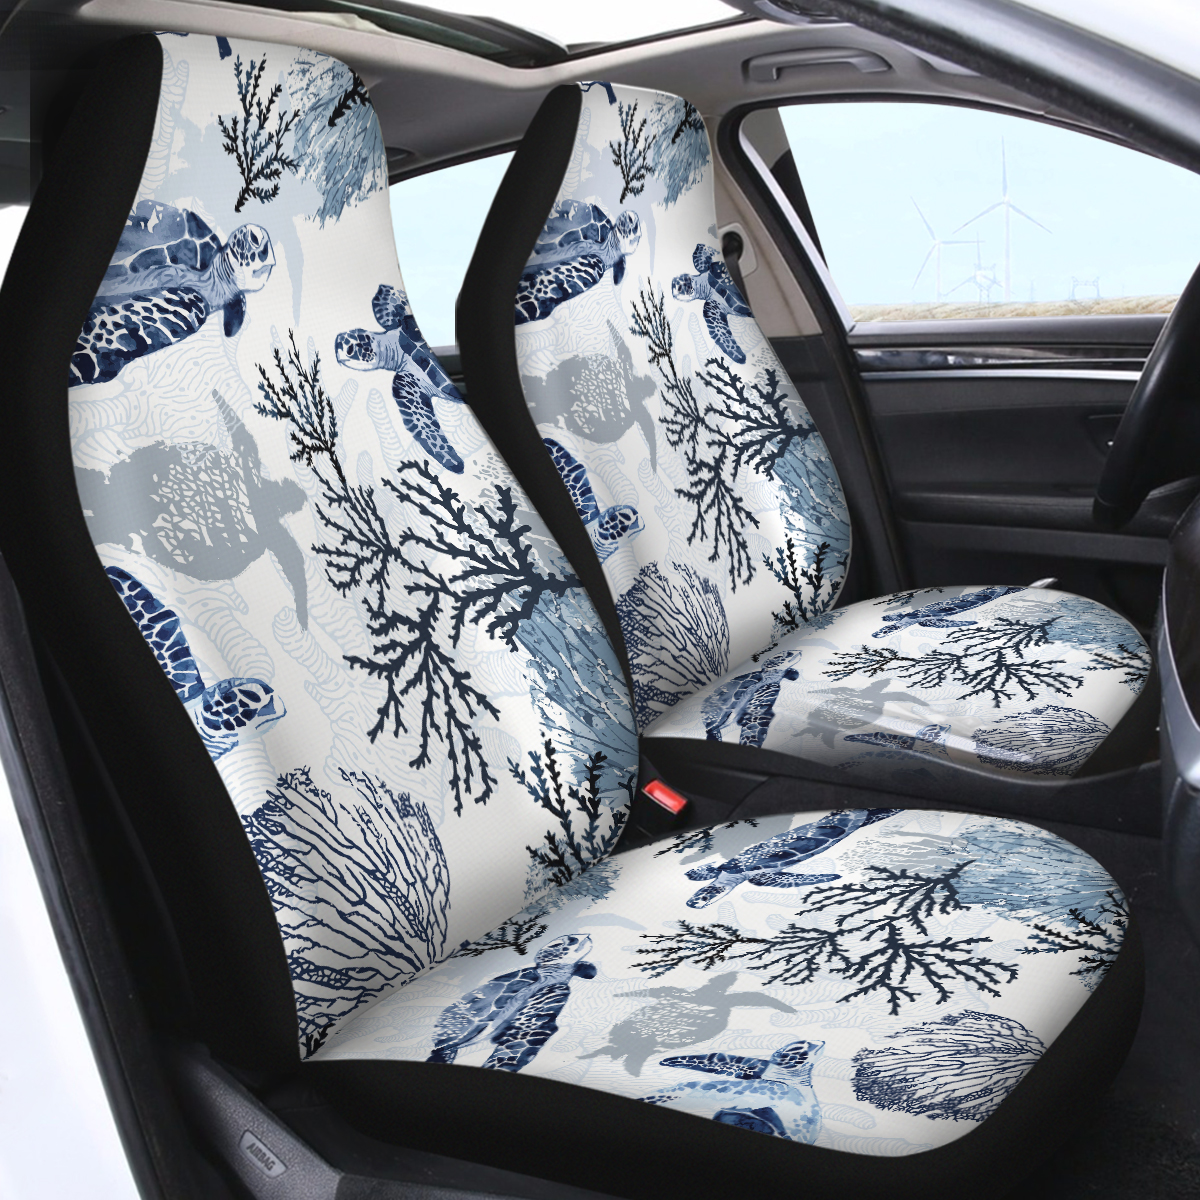 Car Seat Cover - Cosmic Bohemian by Coastal Passion